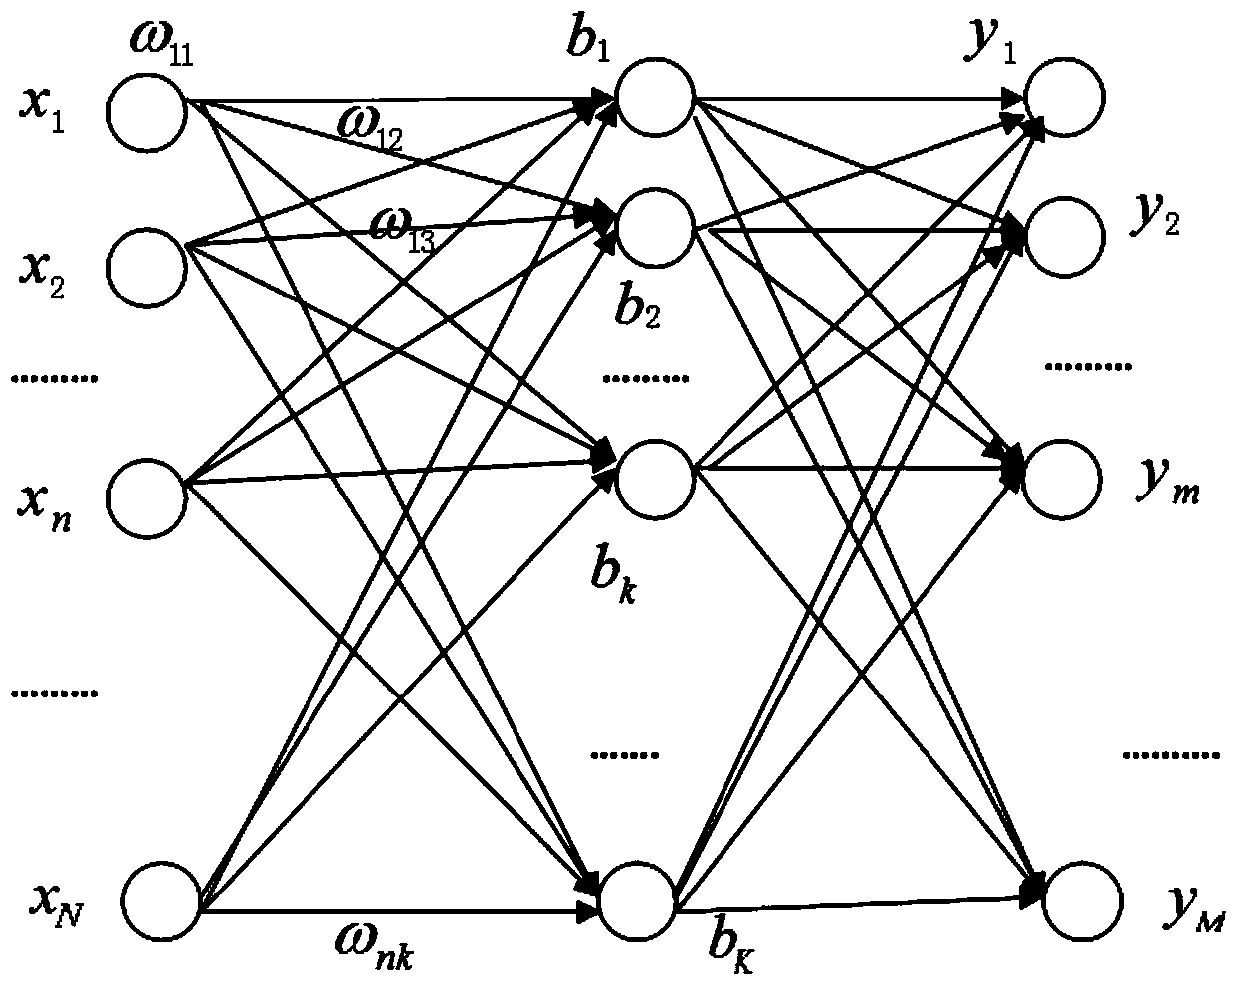 A Transformer Fault Diagnosis Method Based on Neural Network